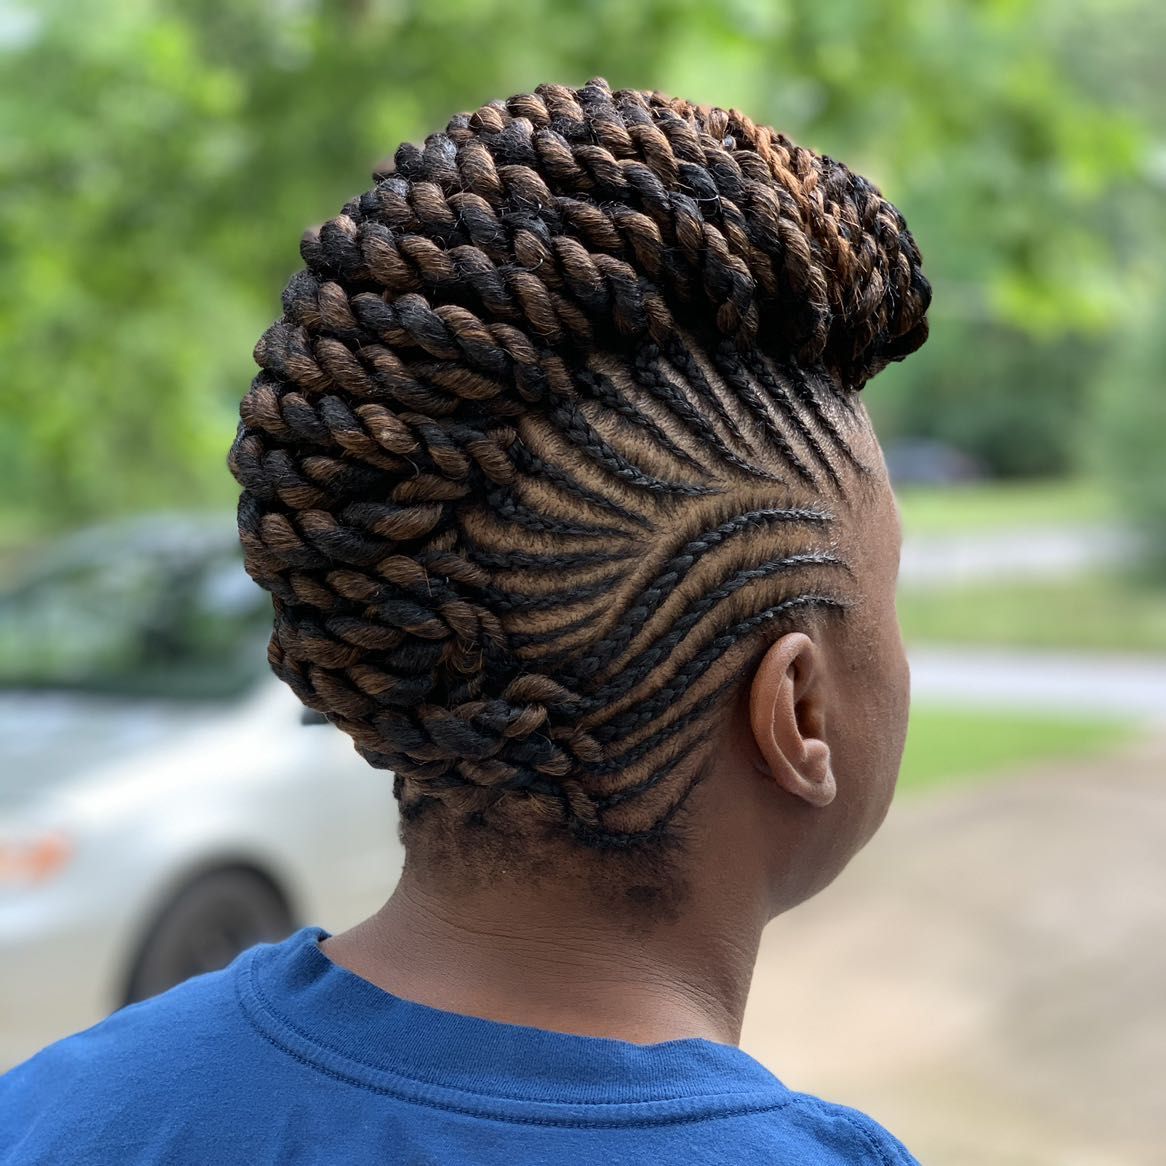 Braided Style W/ Hair Added (Ends Only) portfolio